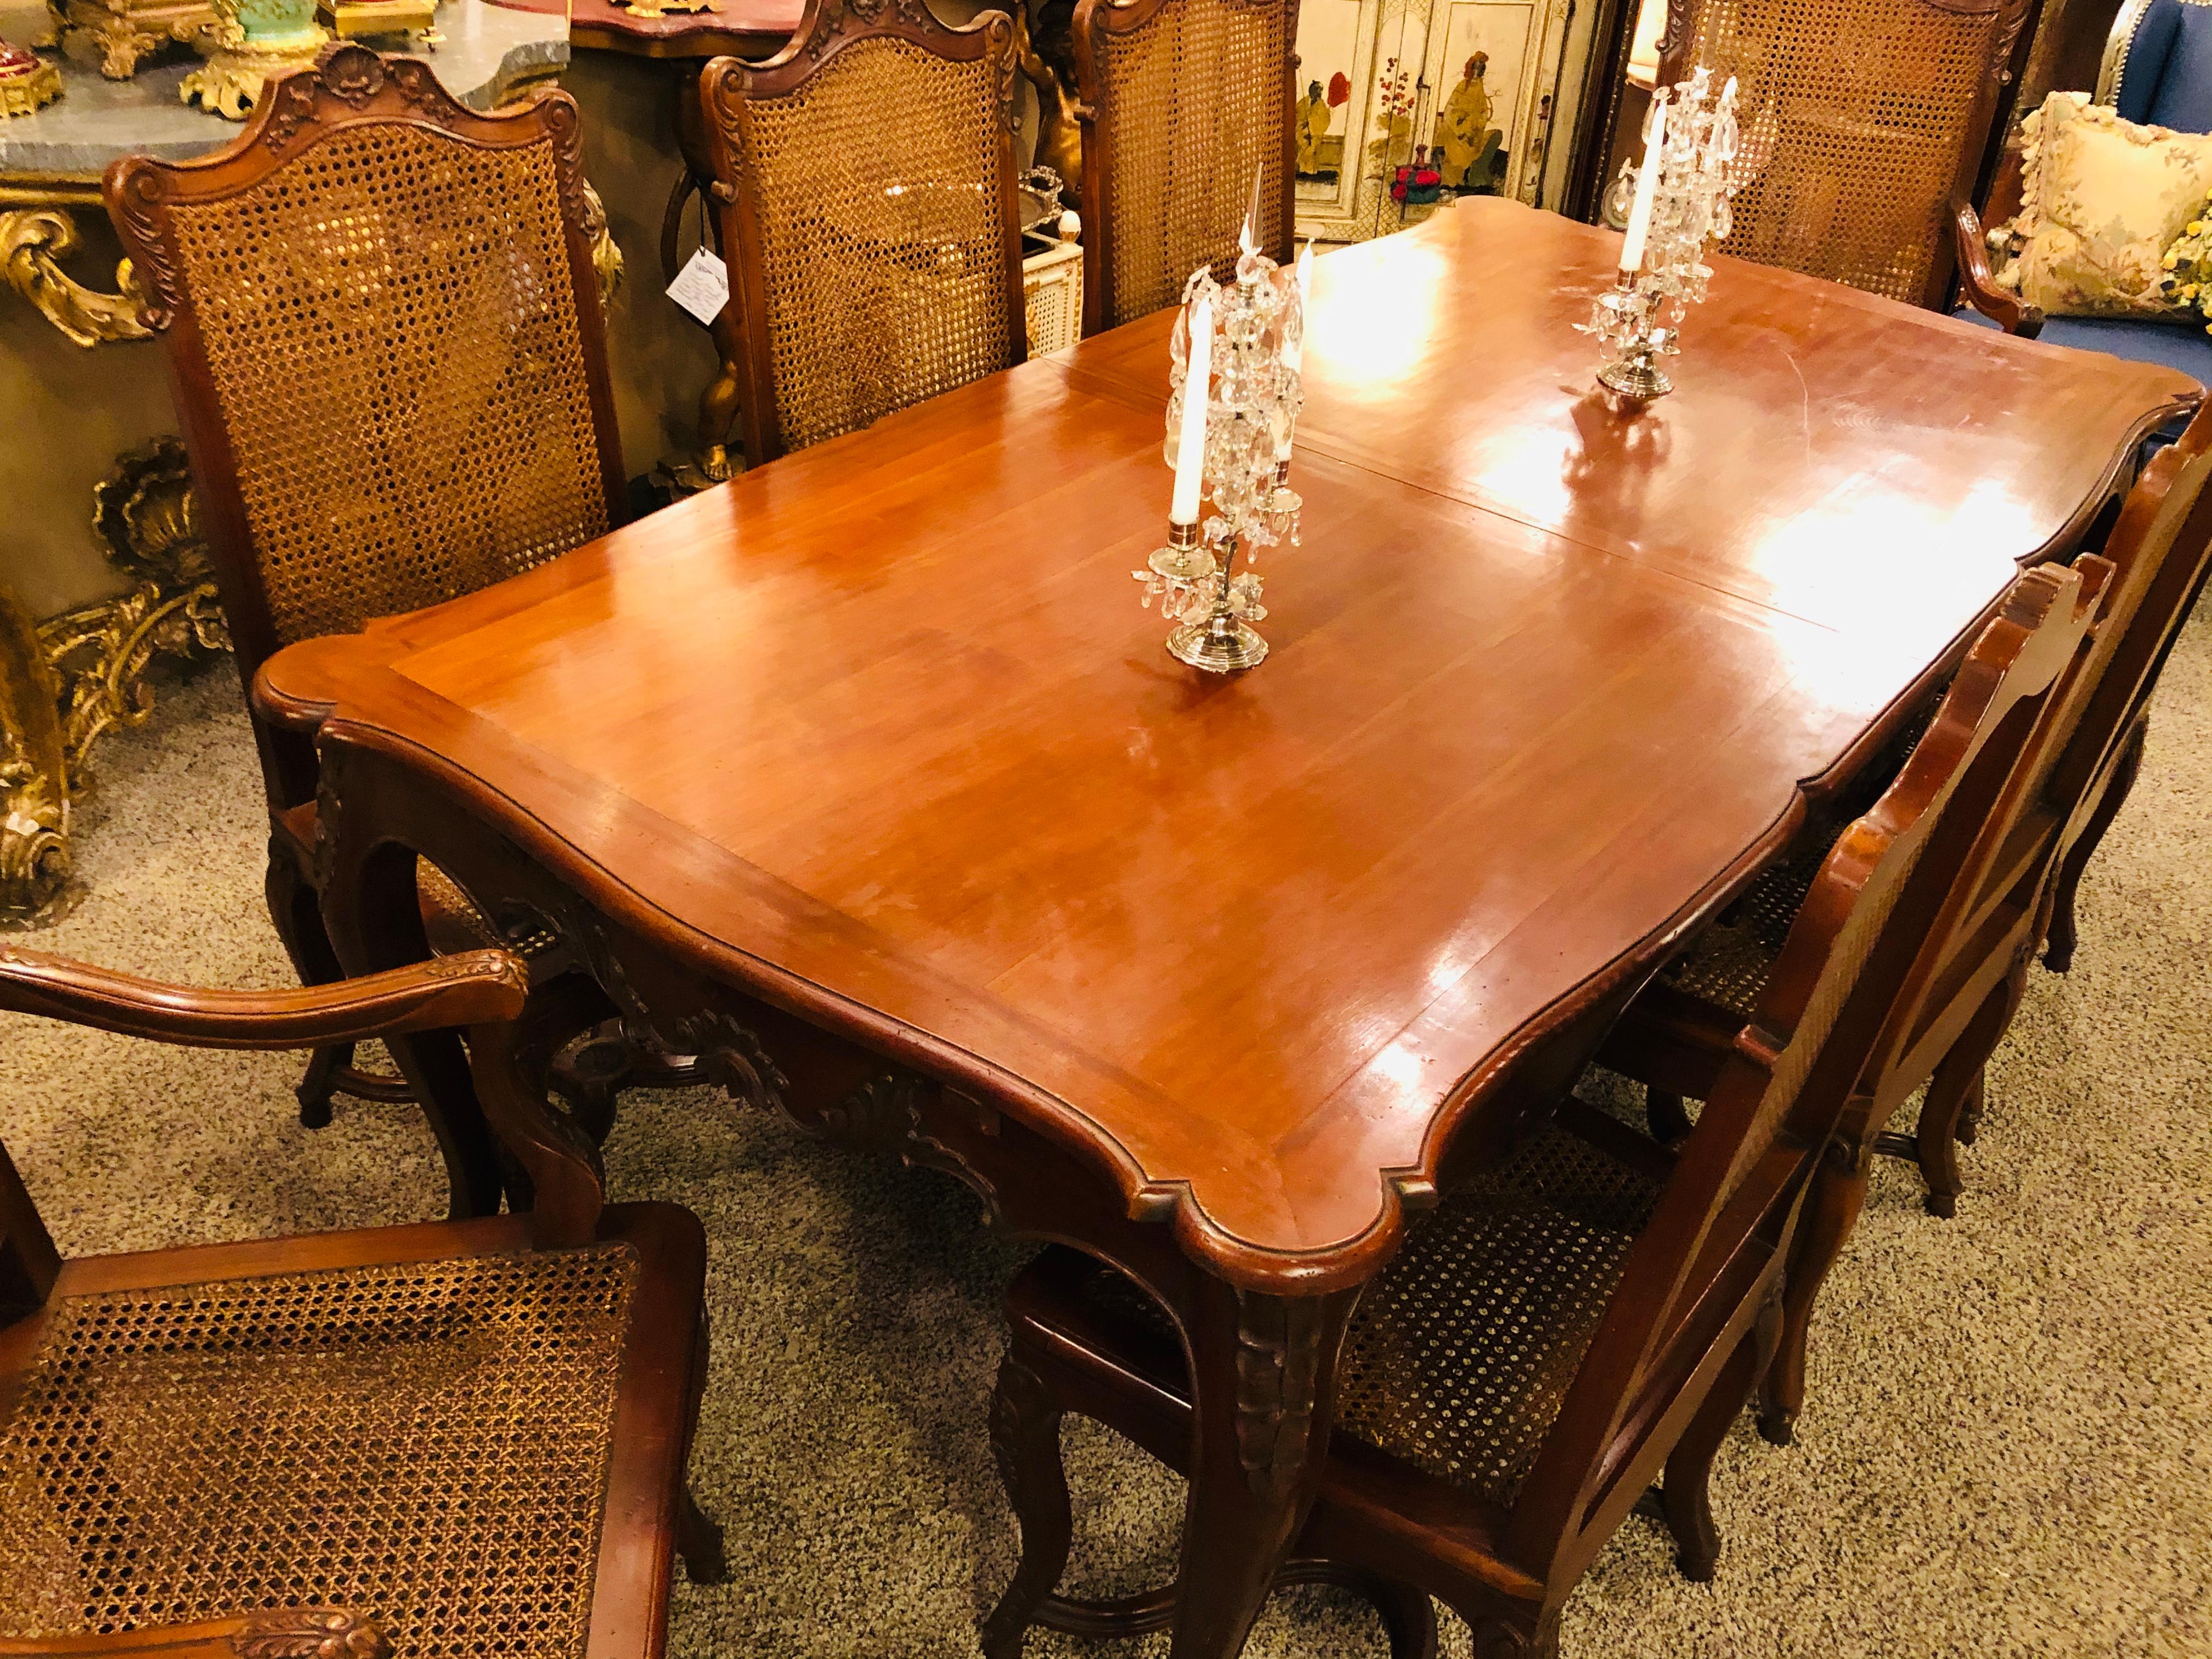 Rococo country French dining set with eight chairs and table having two 17.75 inch leaves. This is an incredible opportunity to purchase a custom quality dining set at a fraction of what was originally paid. The Rococo carved dining chairs having